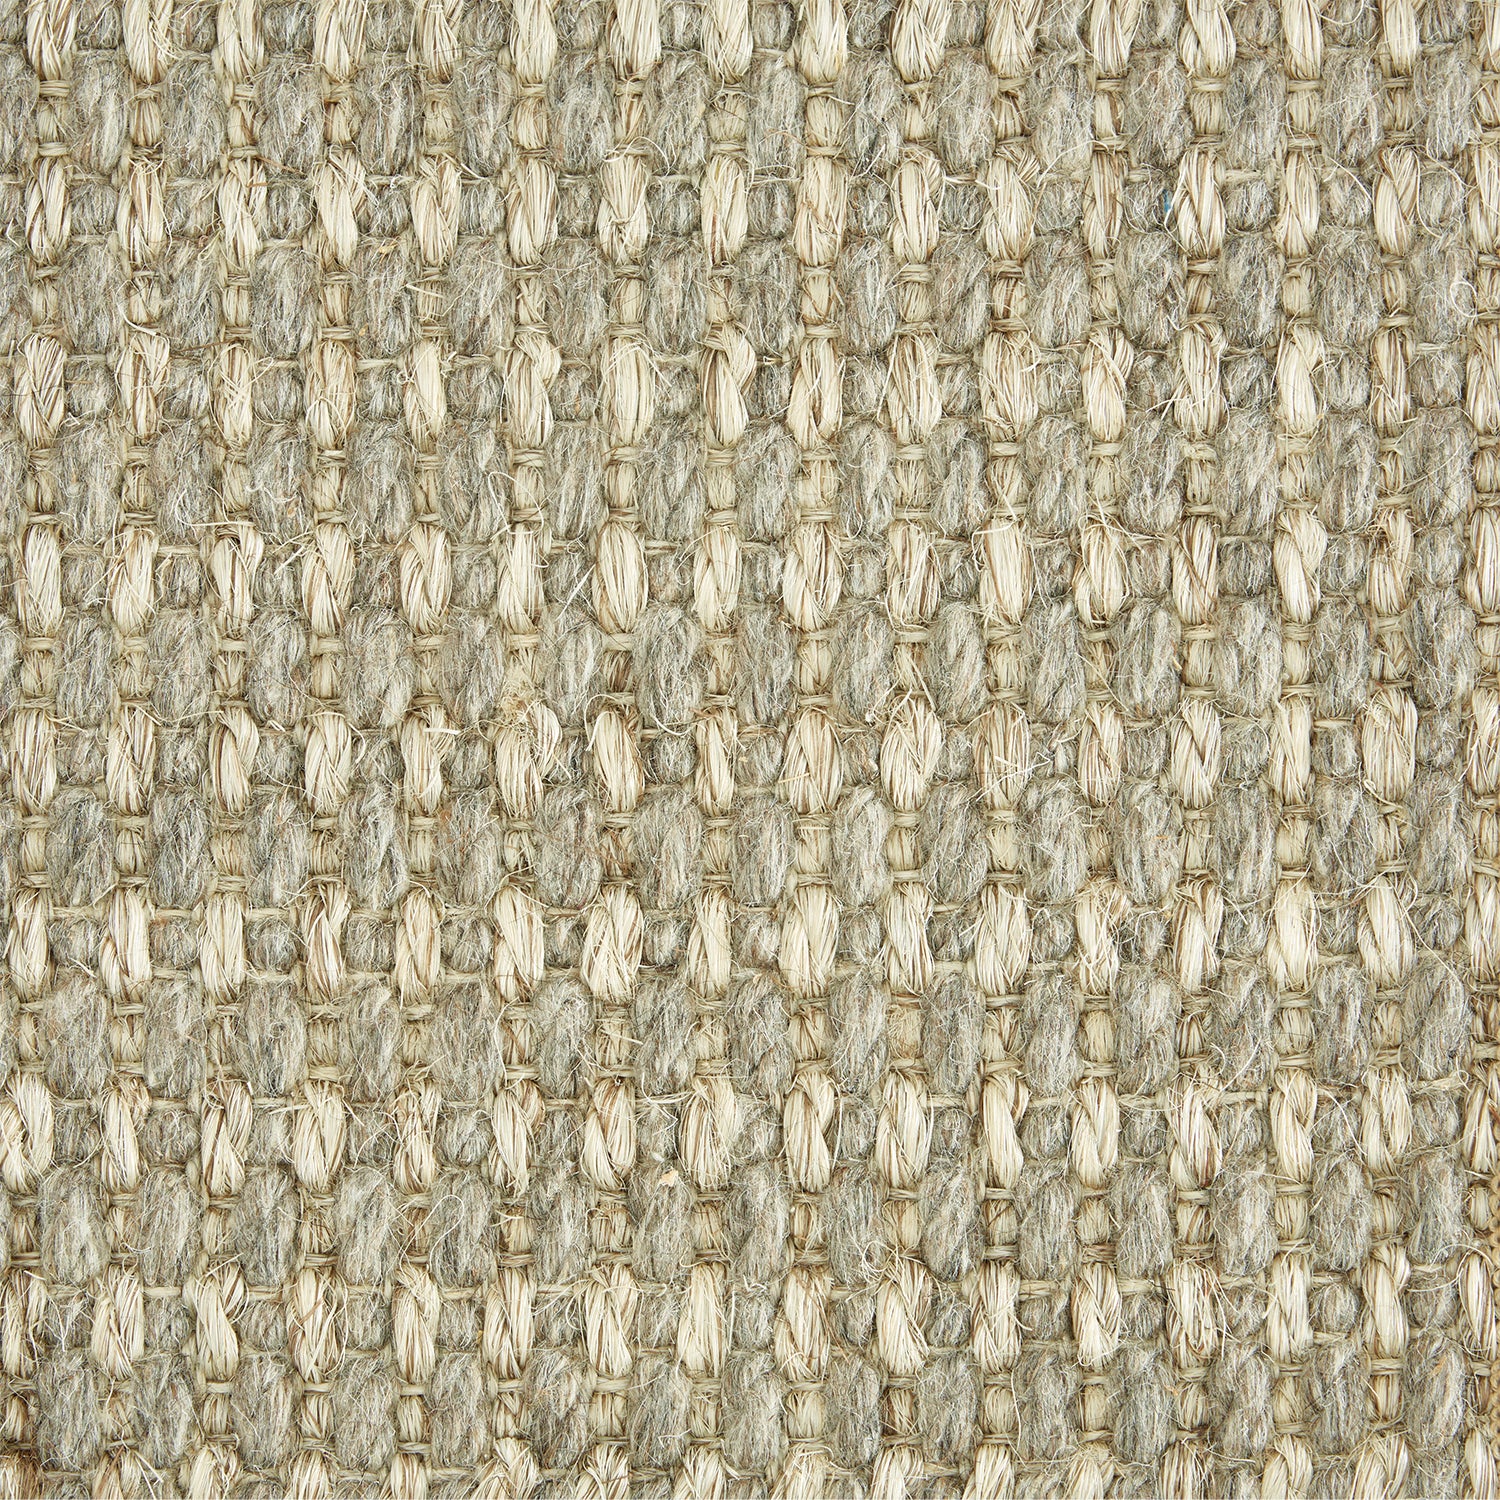 Wool-sisal broadloom carpet swatch in a chunky grid weave in cream and gray.